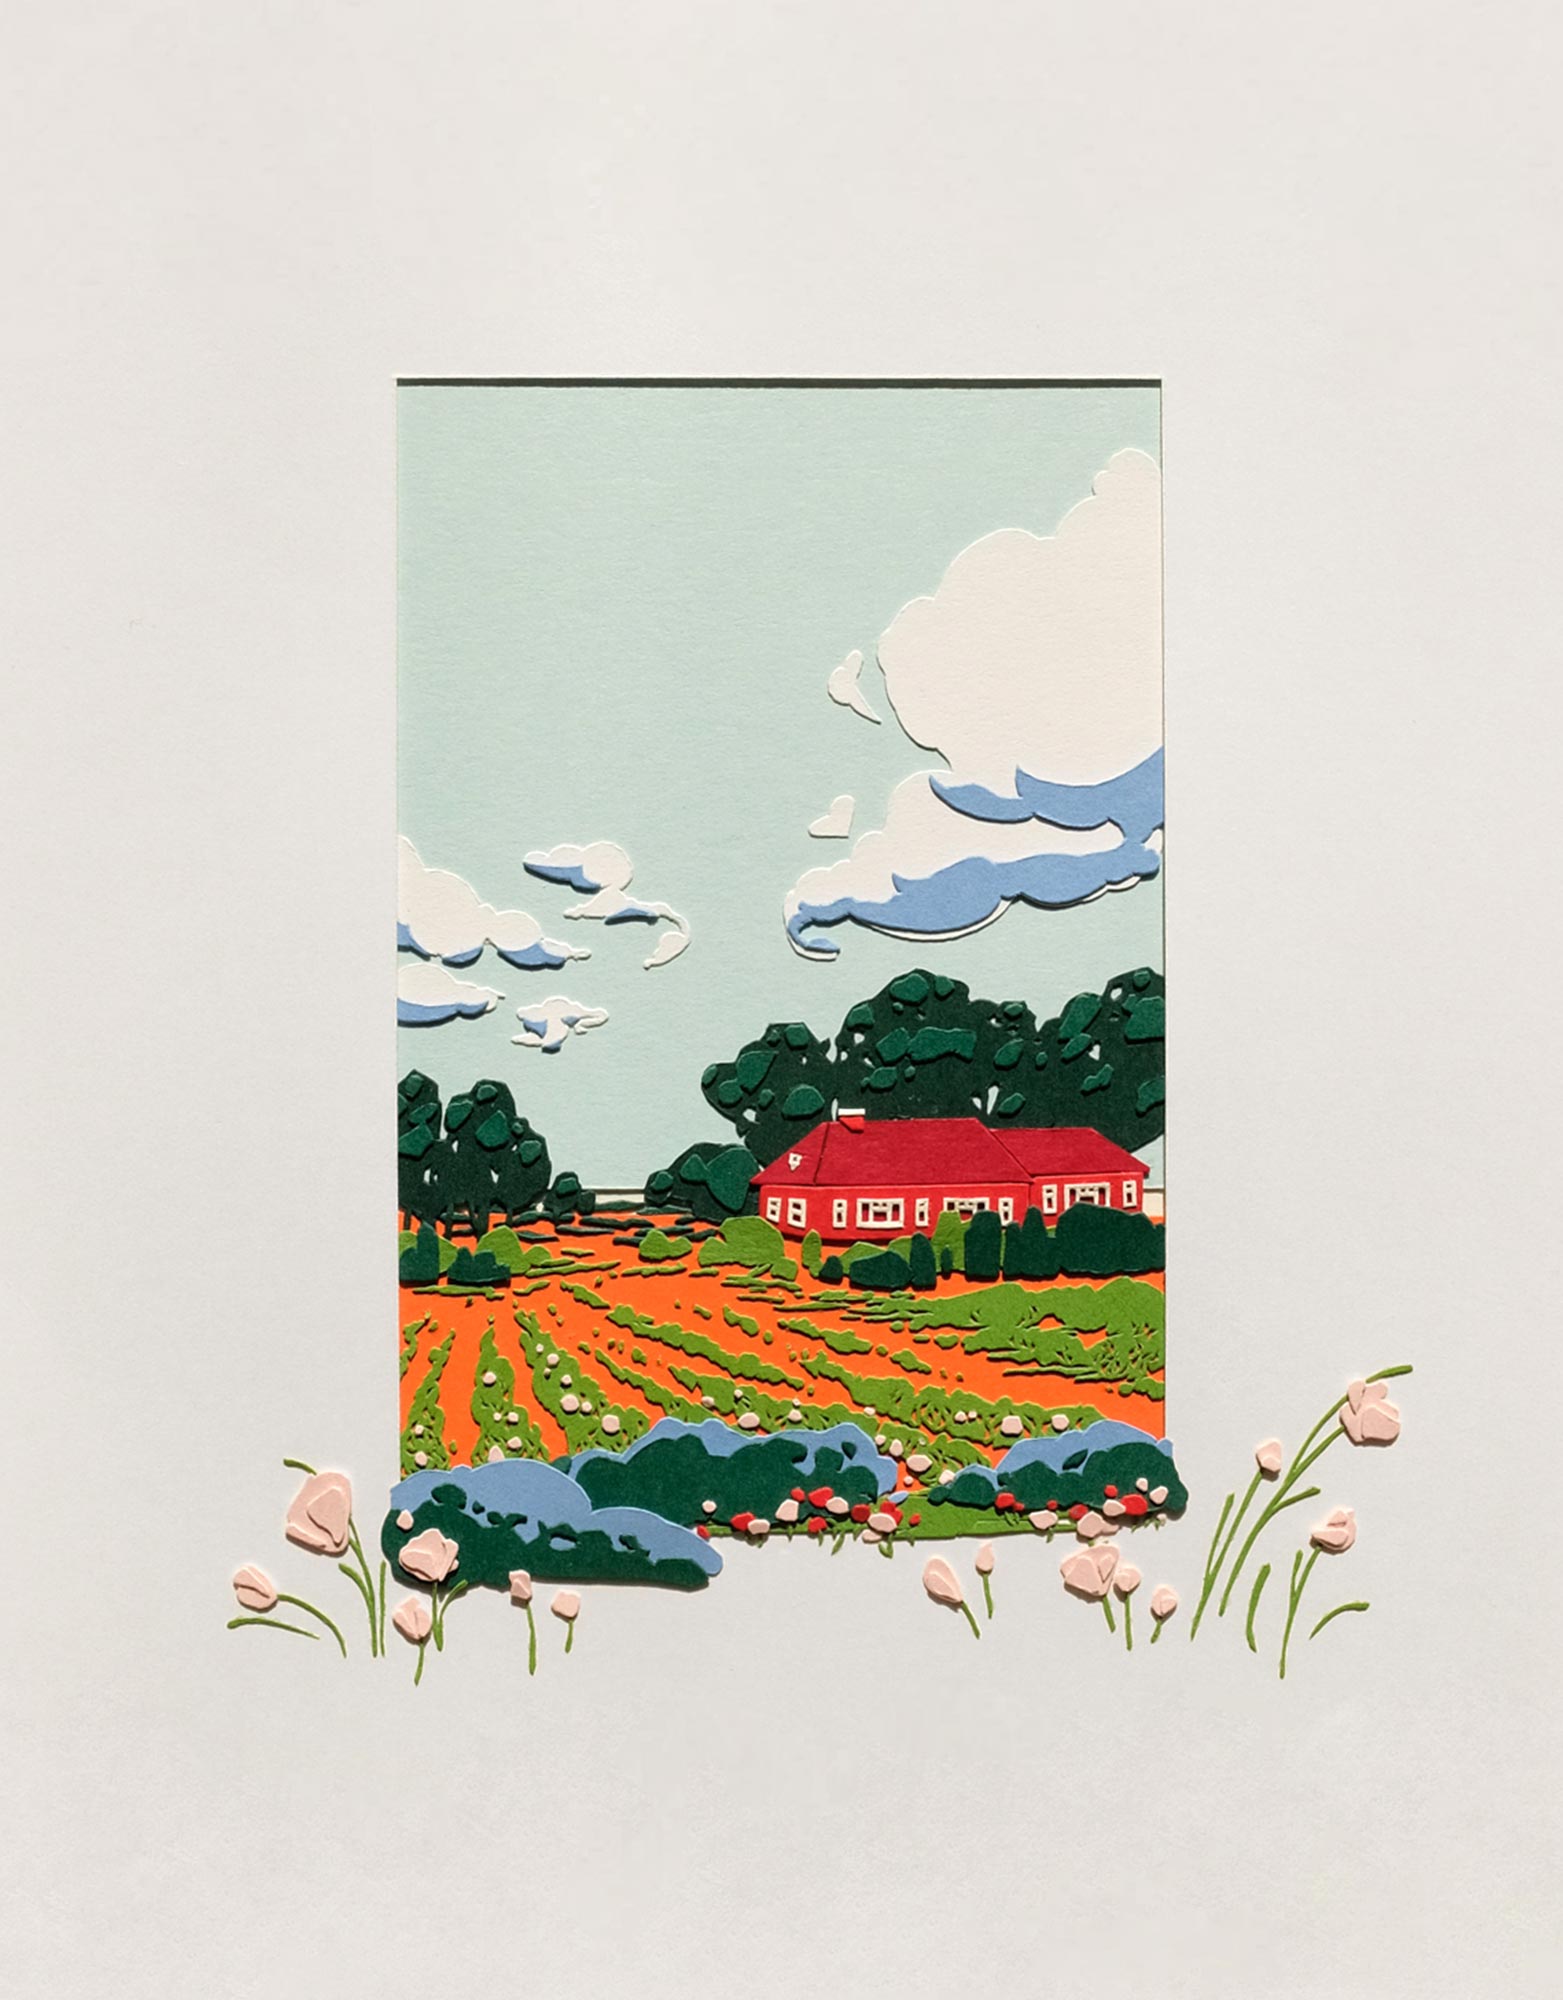 The artwork is shown up close, with a focus on the flowers, the field, and the house.